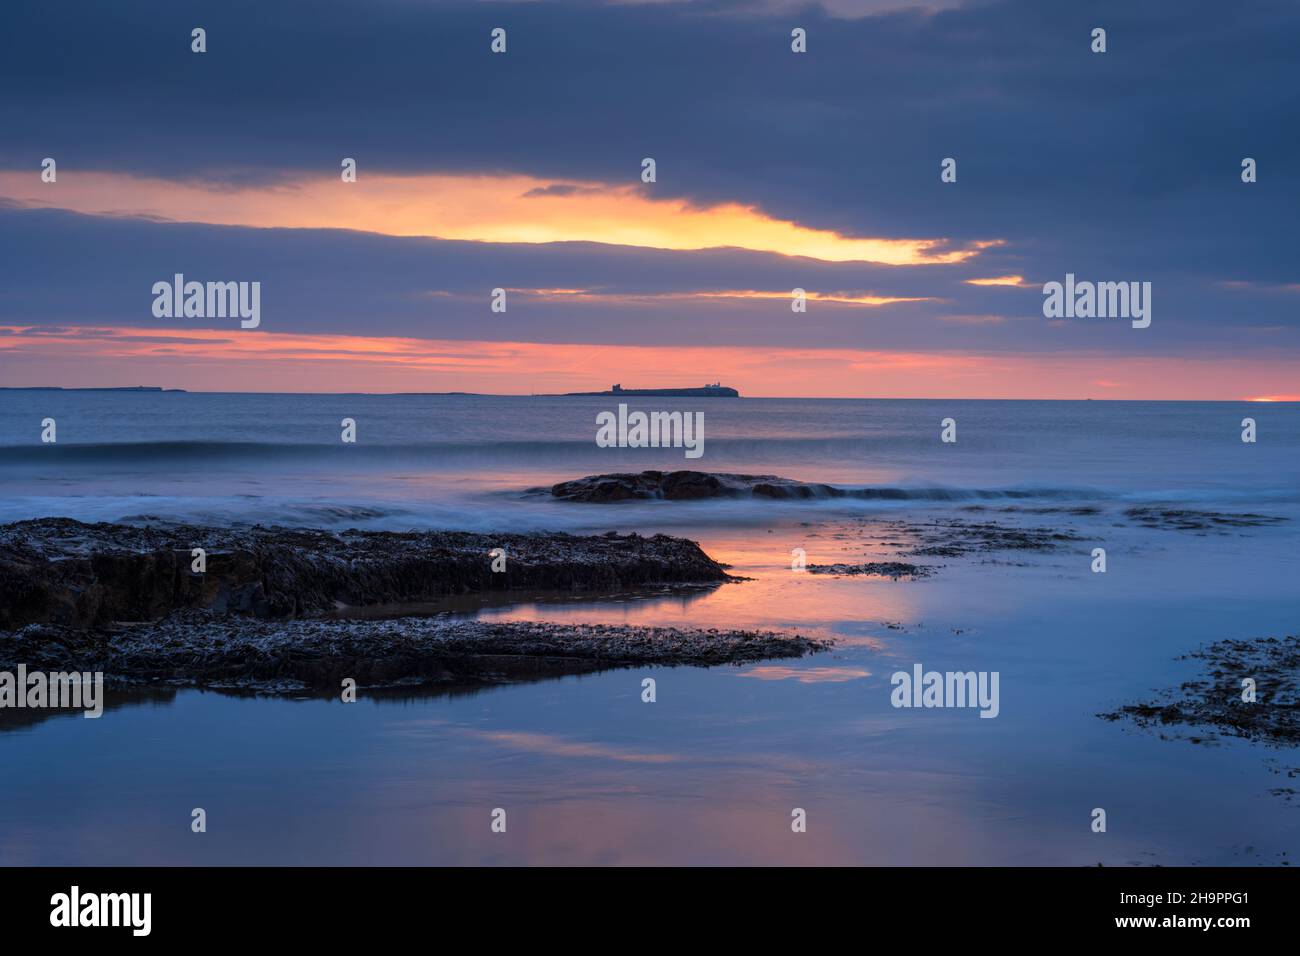 Dawn breaking over Bamburgh beach and the Farne Islands, Northumberland, England. Stock Photo